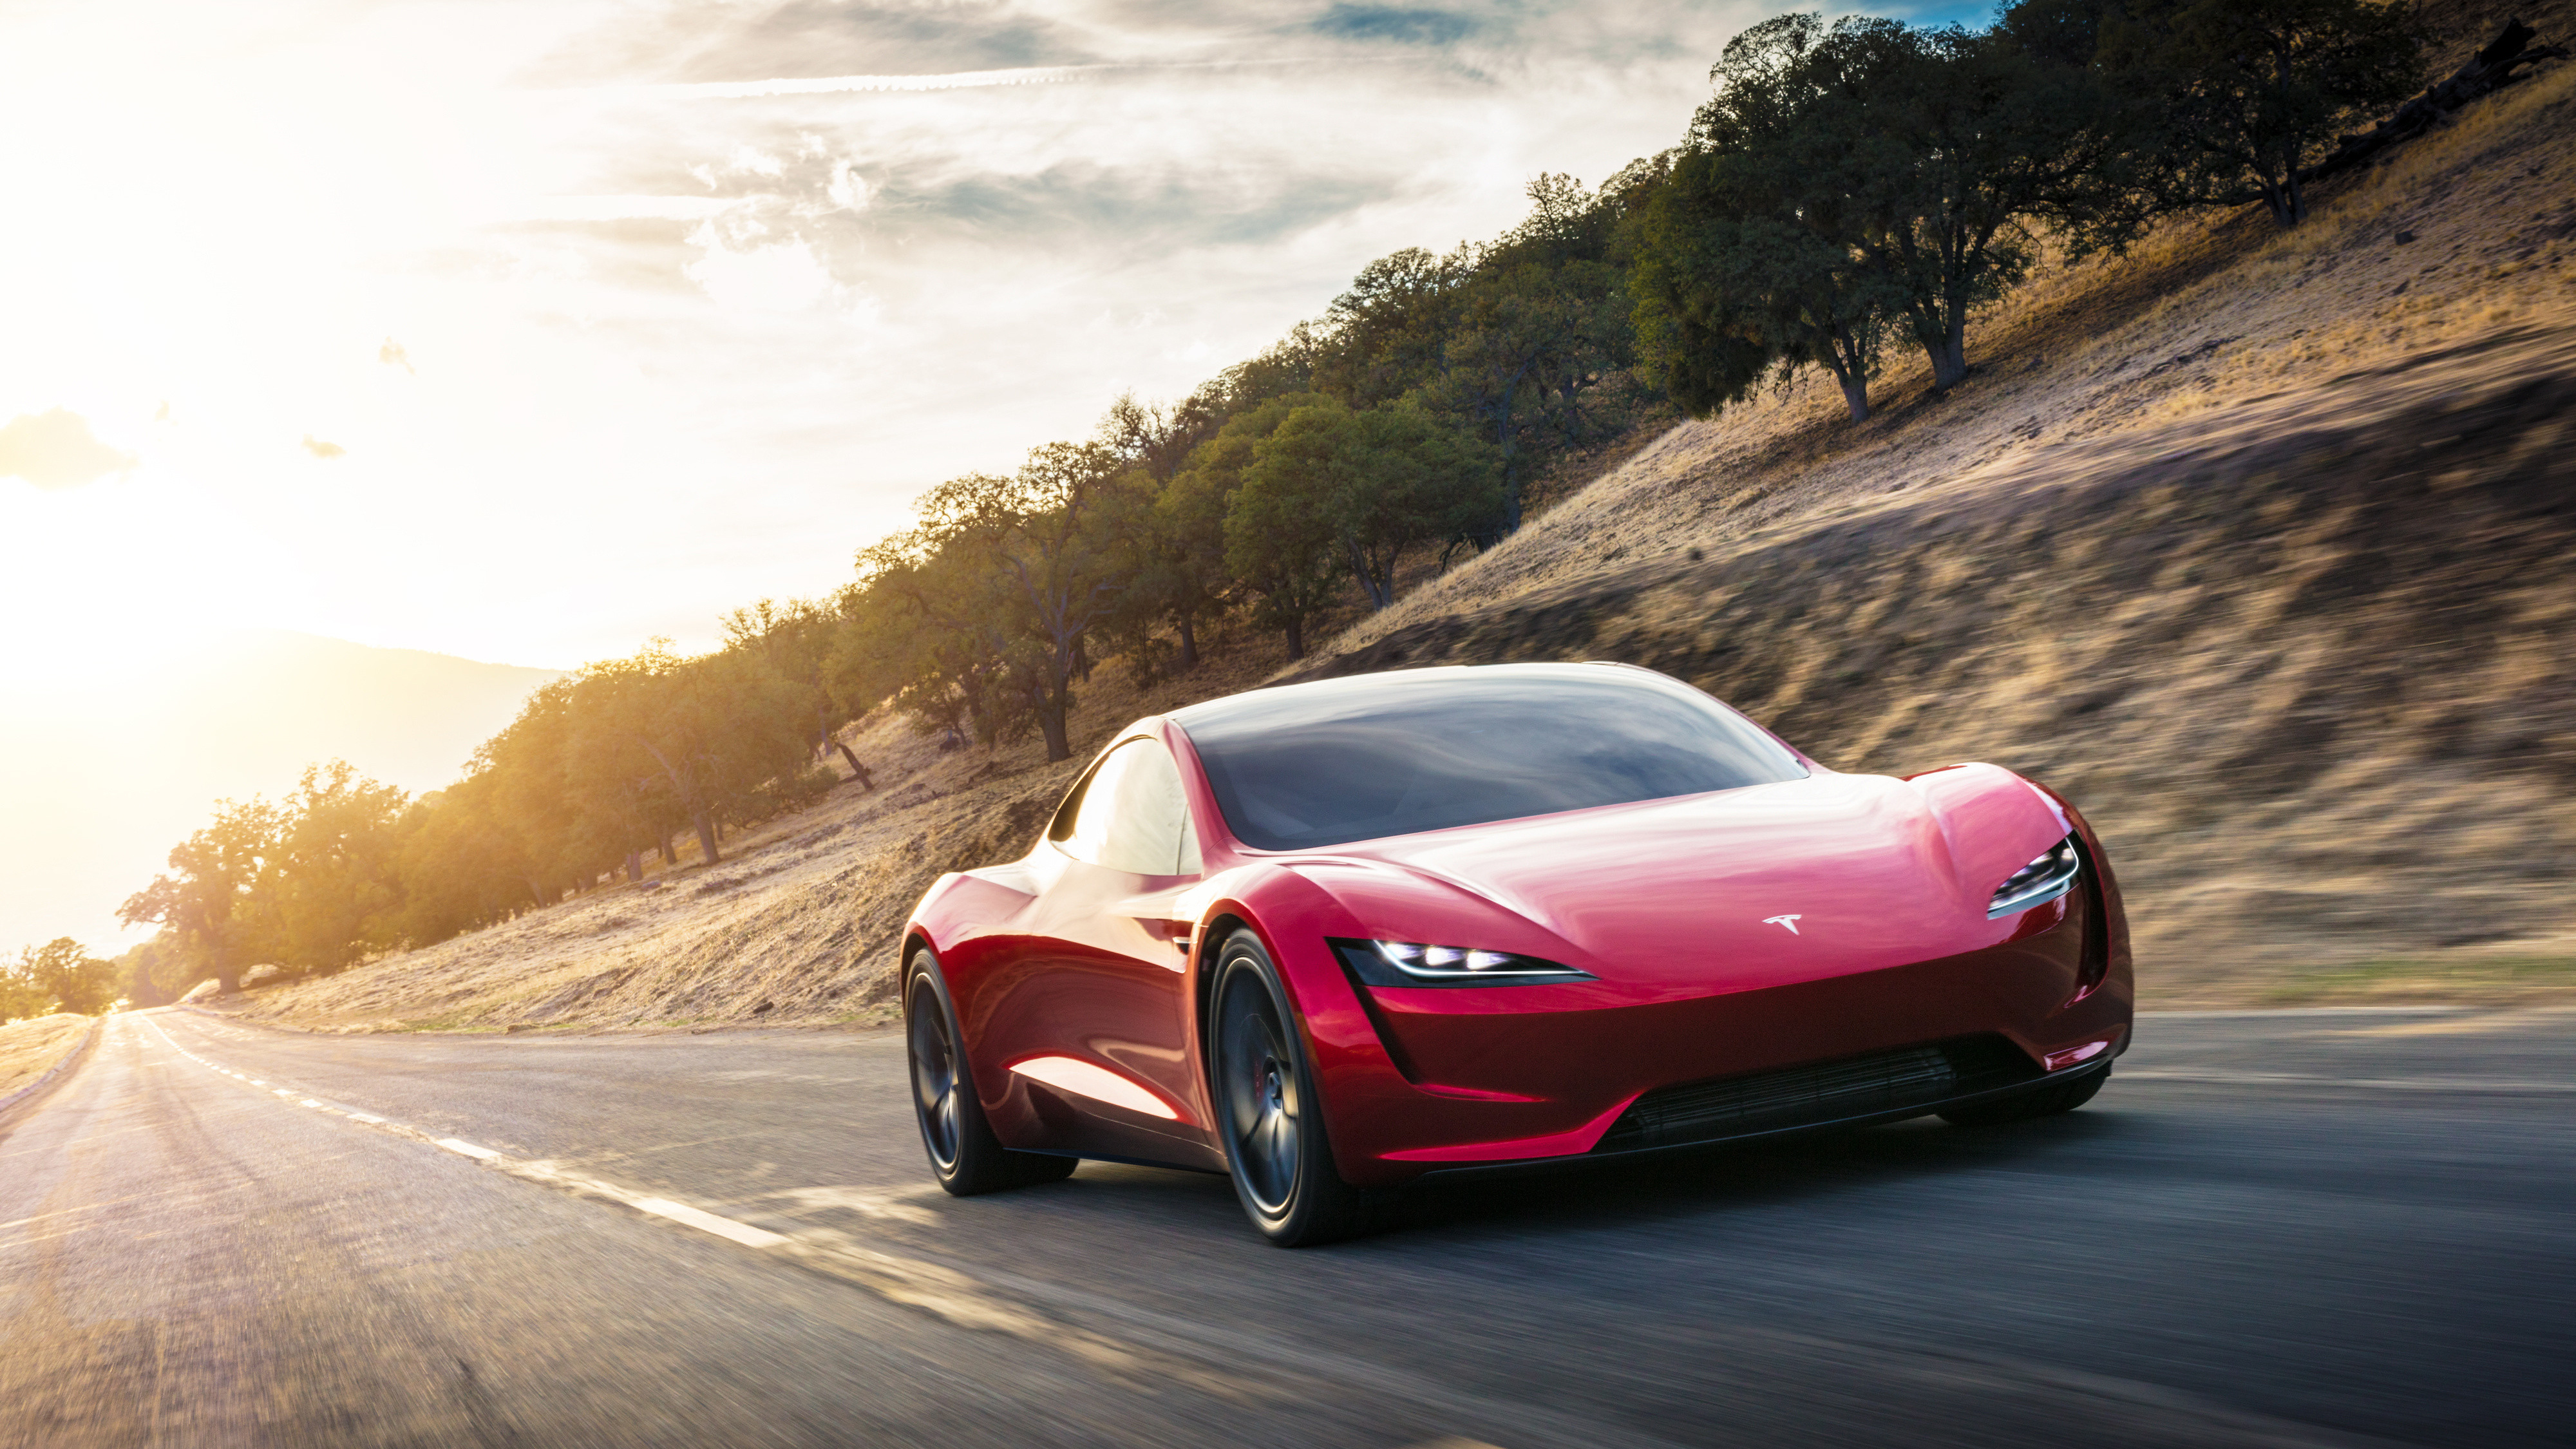 Tesla Roadster Price, release window, 0-60, range potential and more |  Tom's Guide